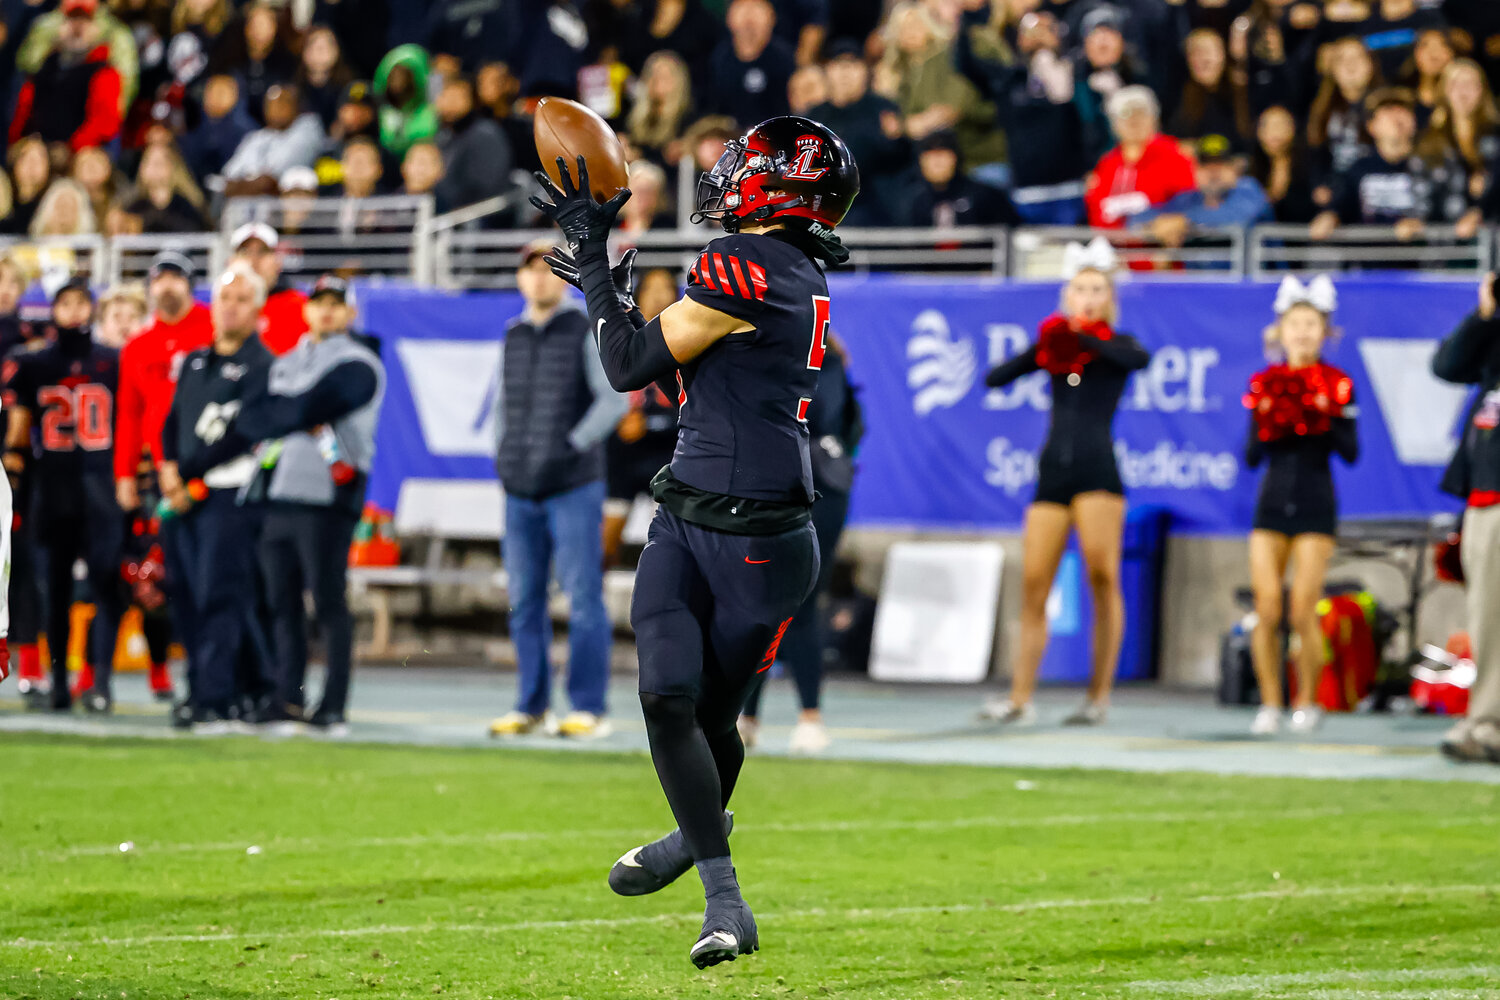 Liberty senior wide receiver Ryan Jezioro hauls in a touchdown catch on Saturday during the Lions' 33-21 win in the Open Division title game against rival Centennial. (Courtesy JJ Digos Photography/For West Valley Preps)